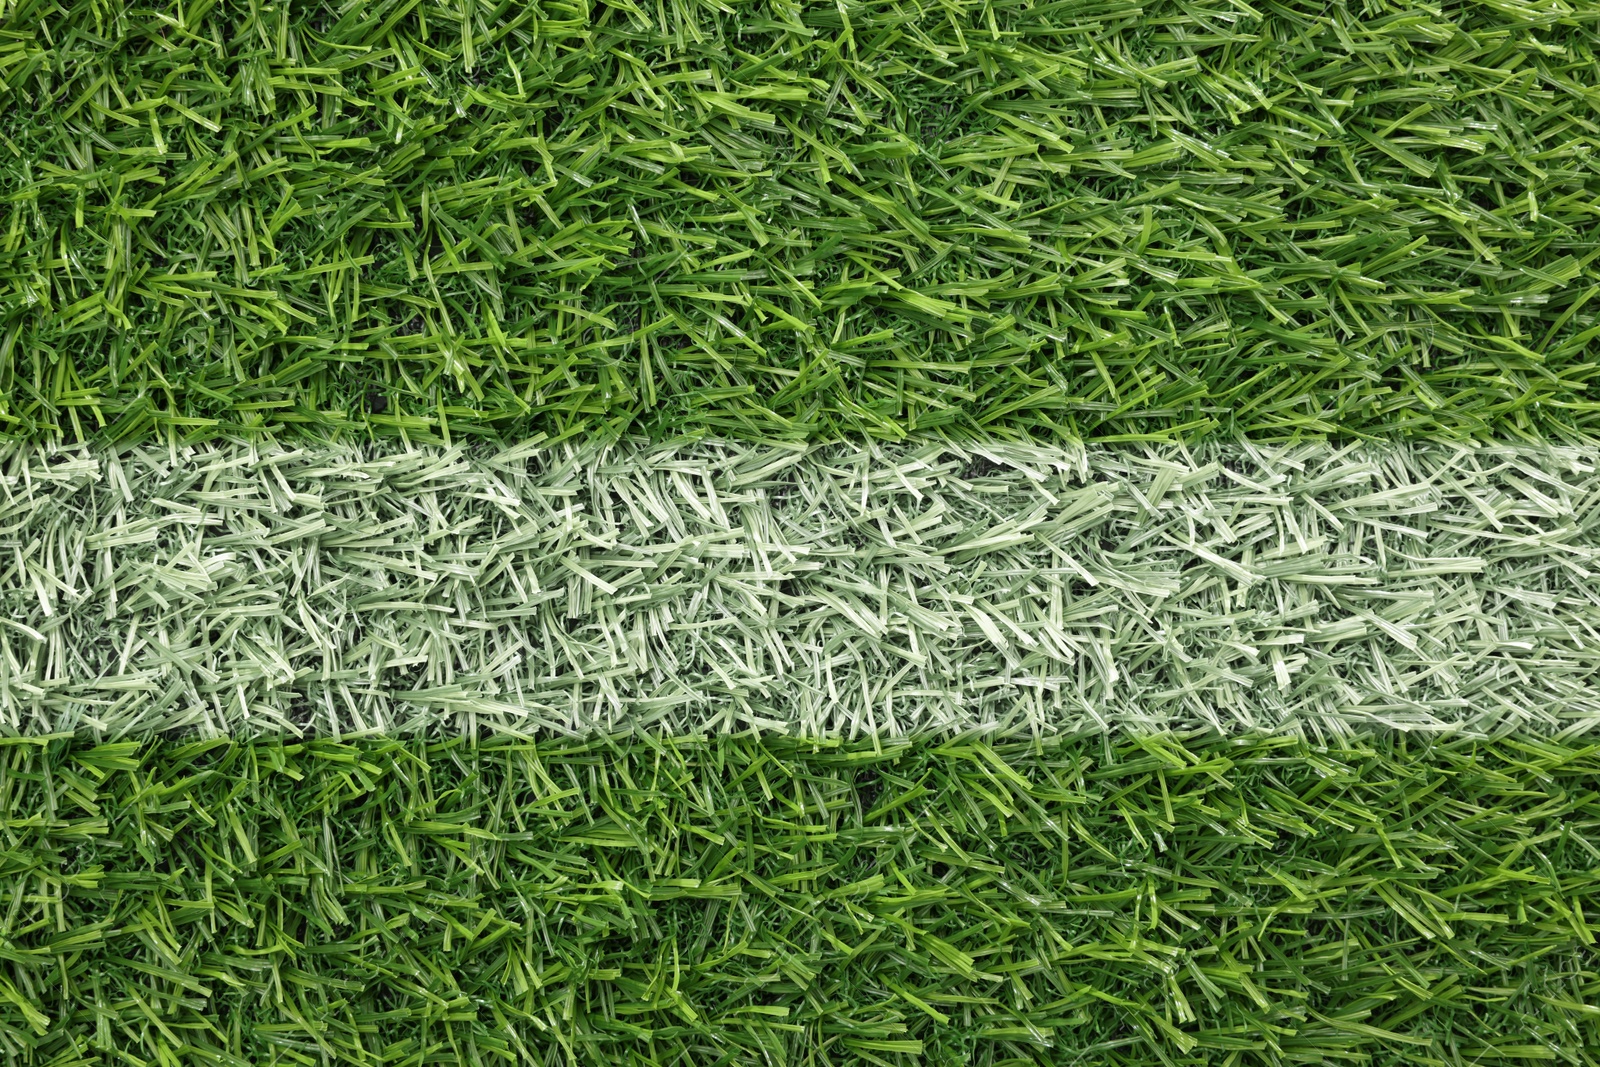 Image of Green grass with white marking, top view